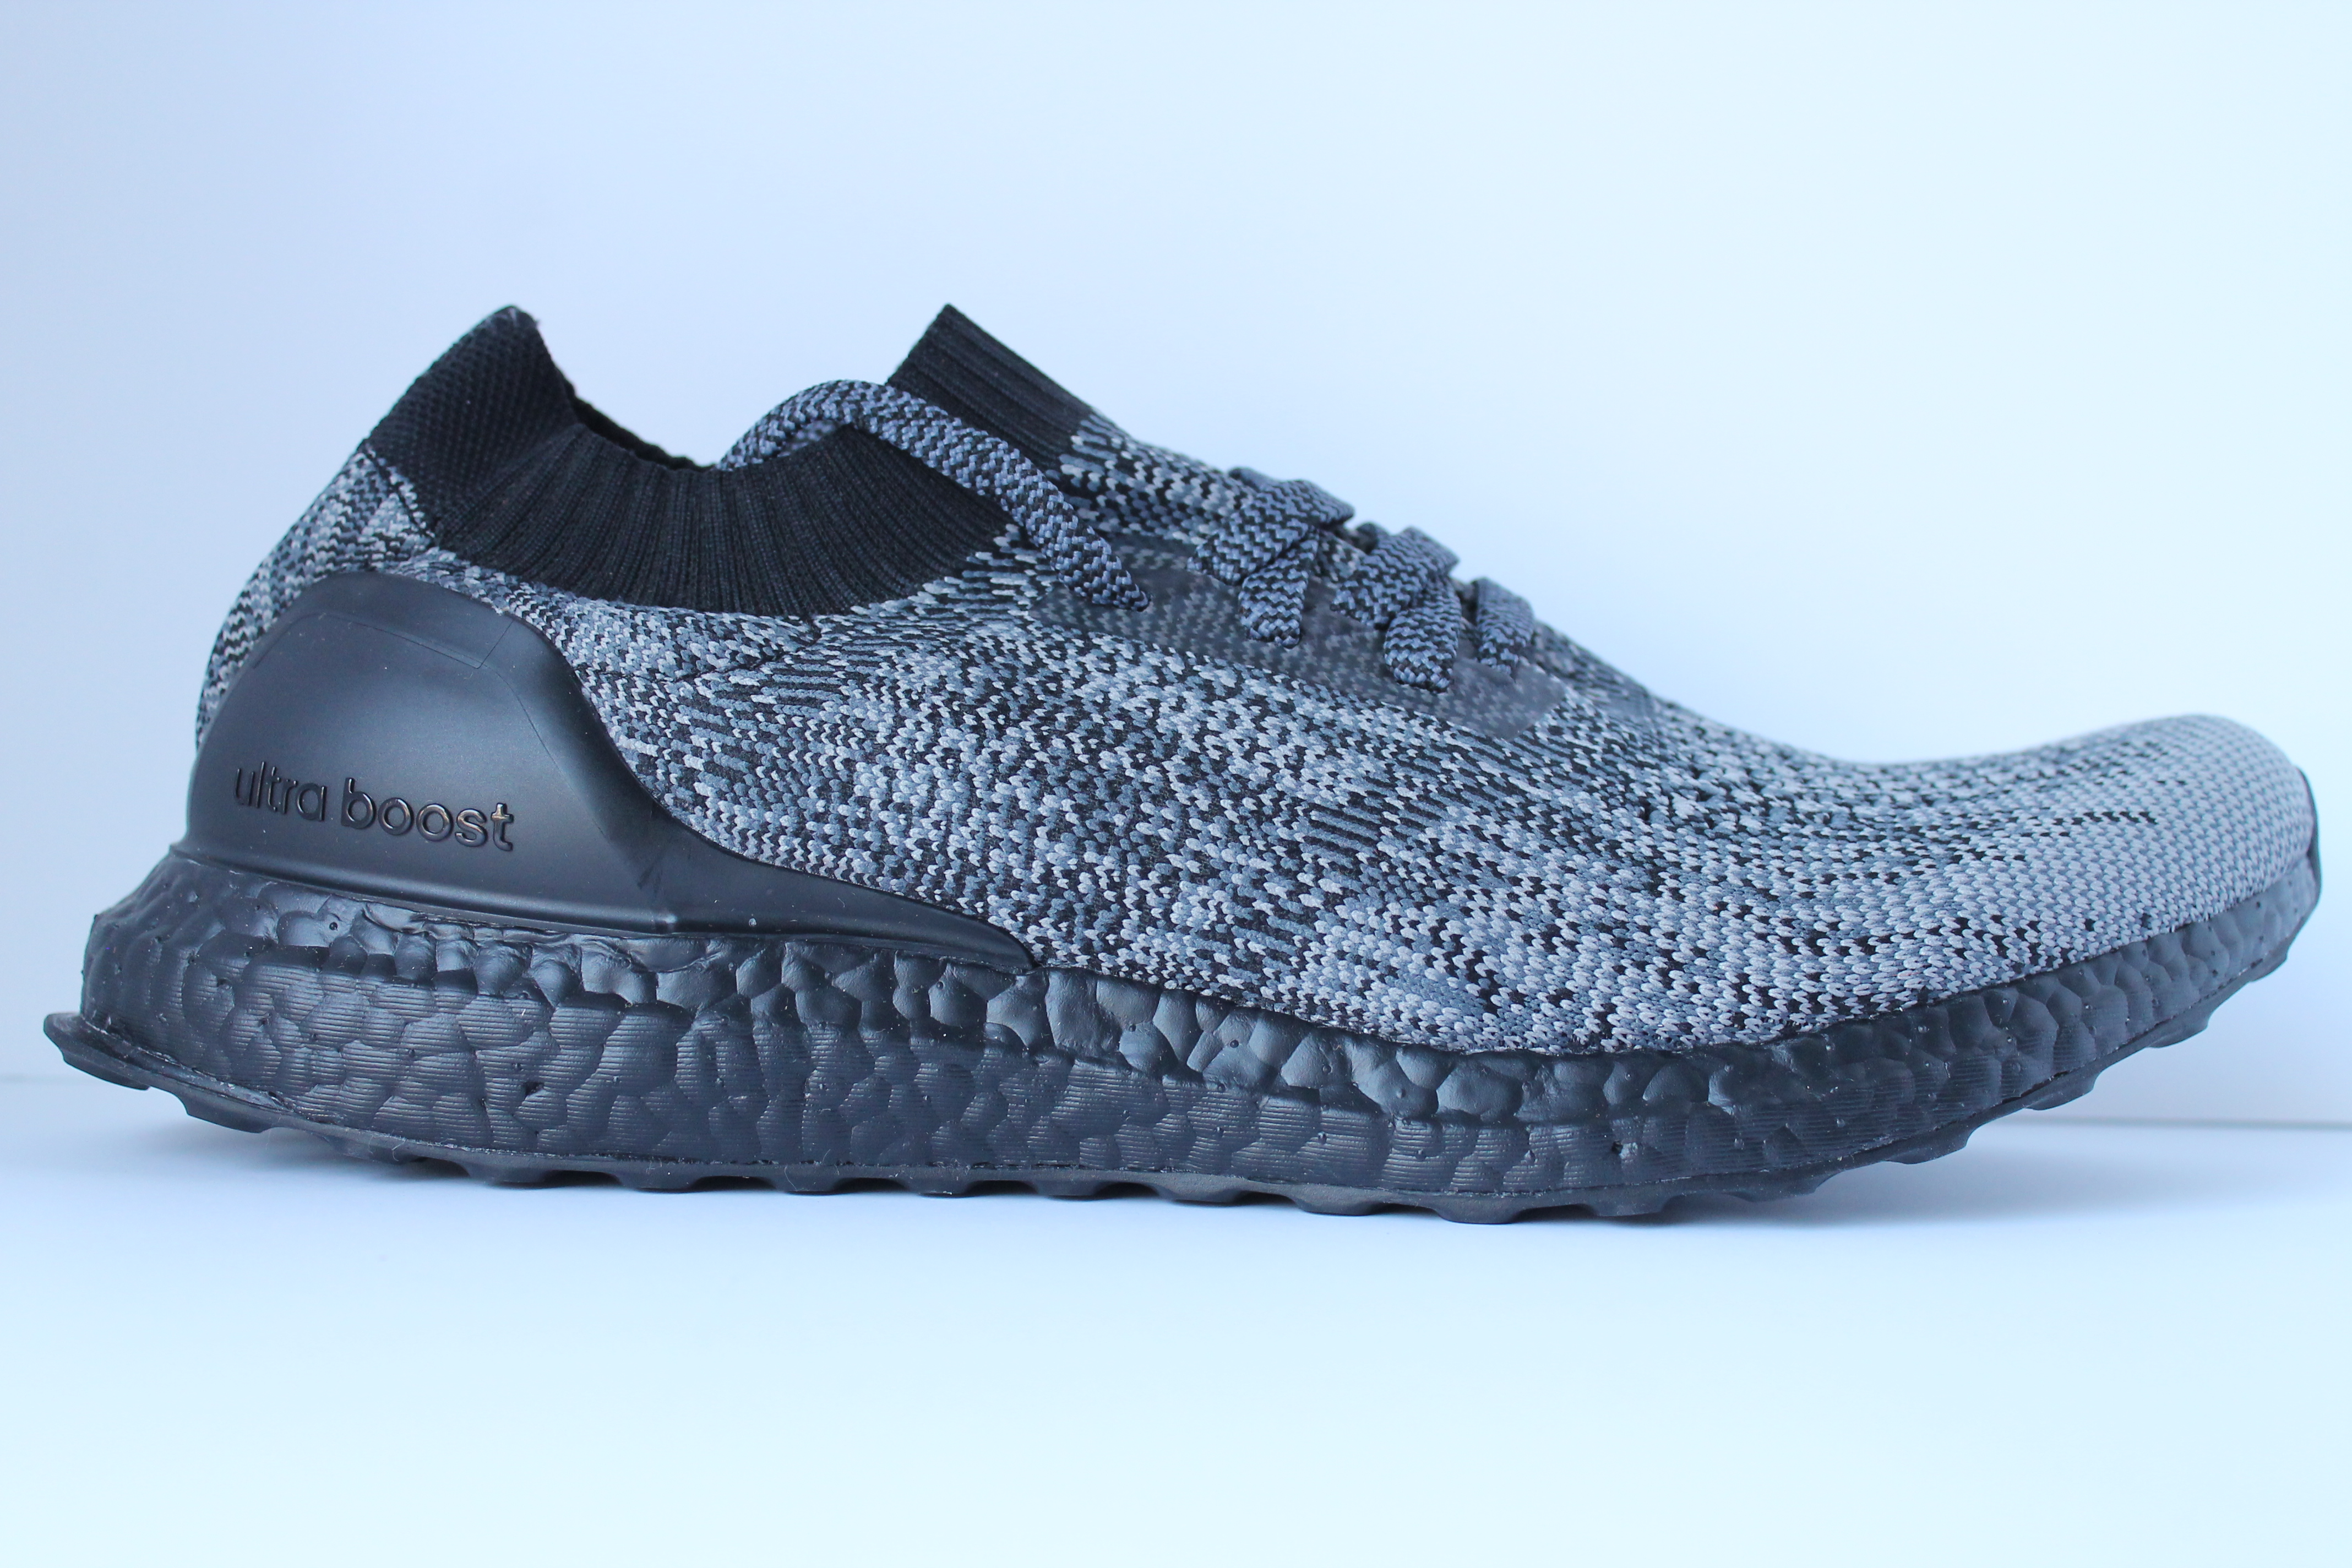 Adidas Ultra Boost Uncaged LTD Colored Boost - Black